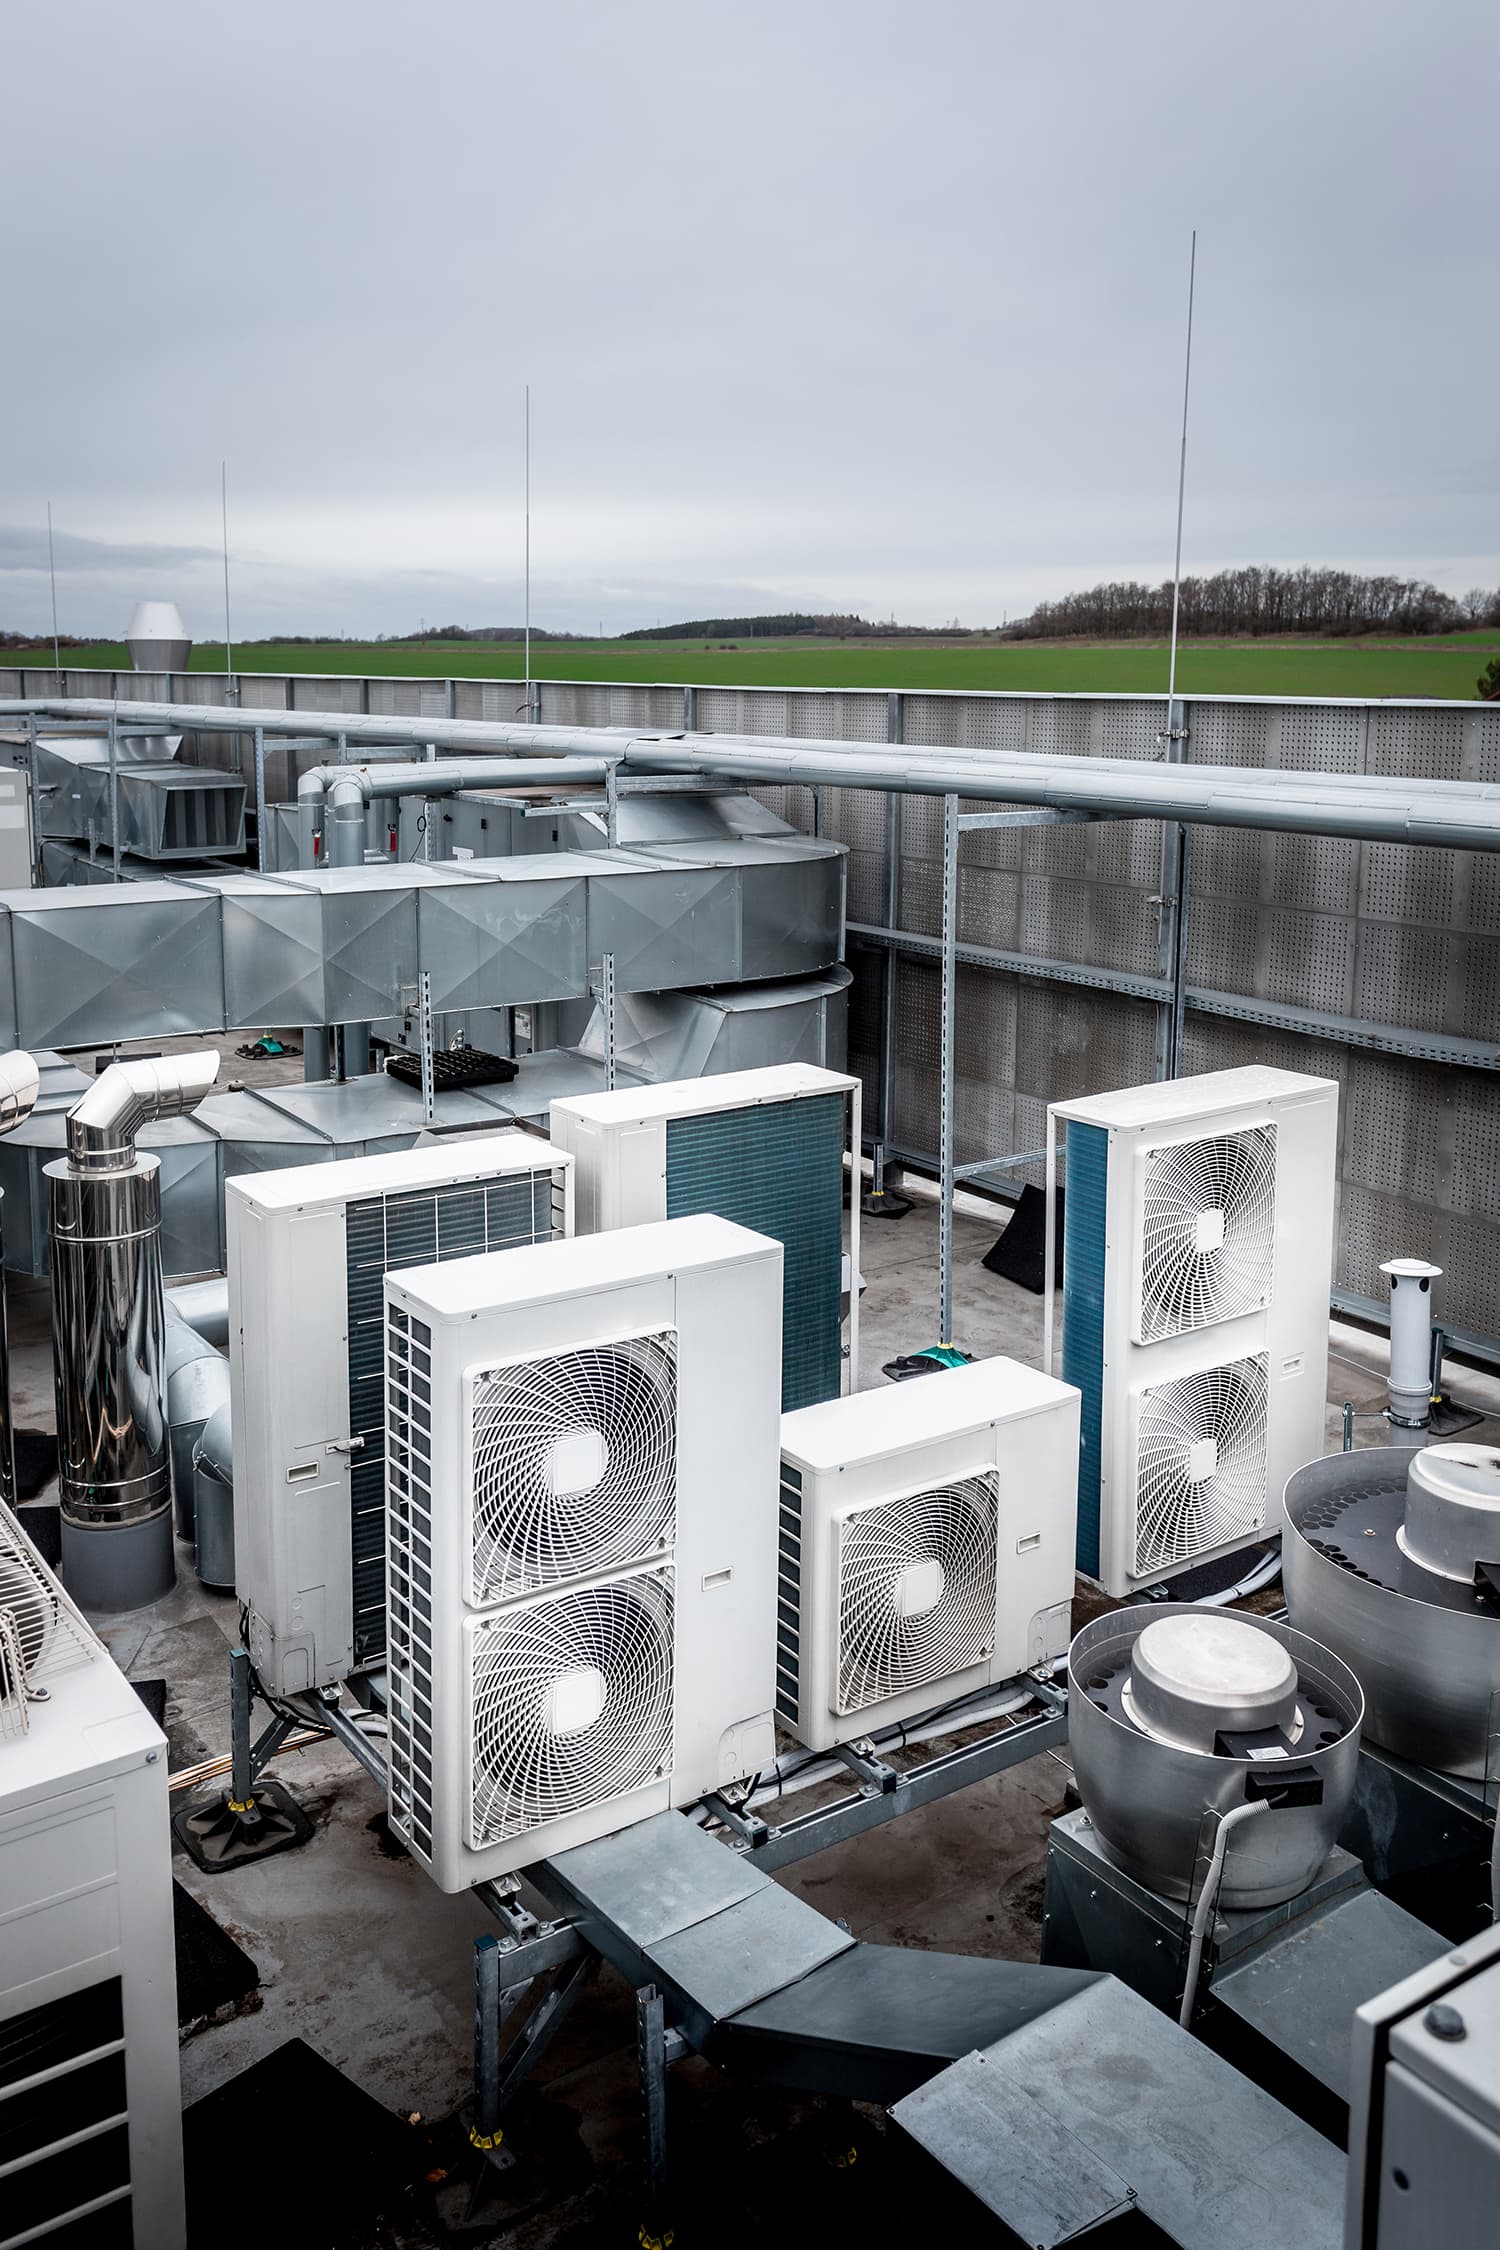 Square air-conditioning units on the roof with round fan grills